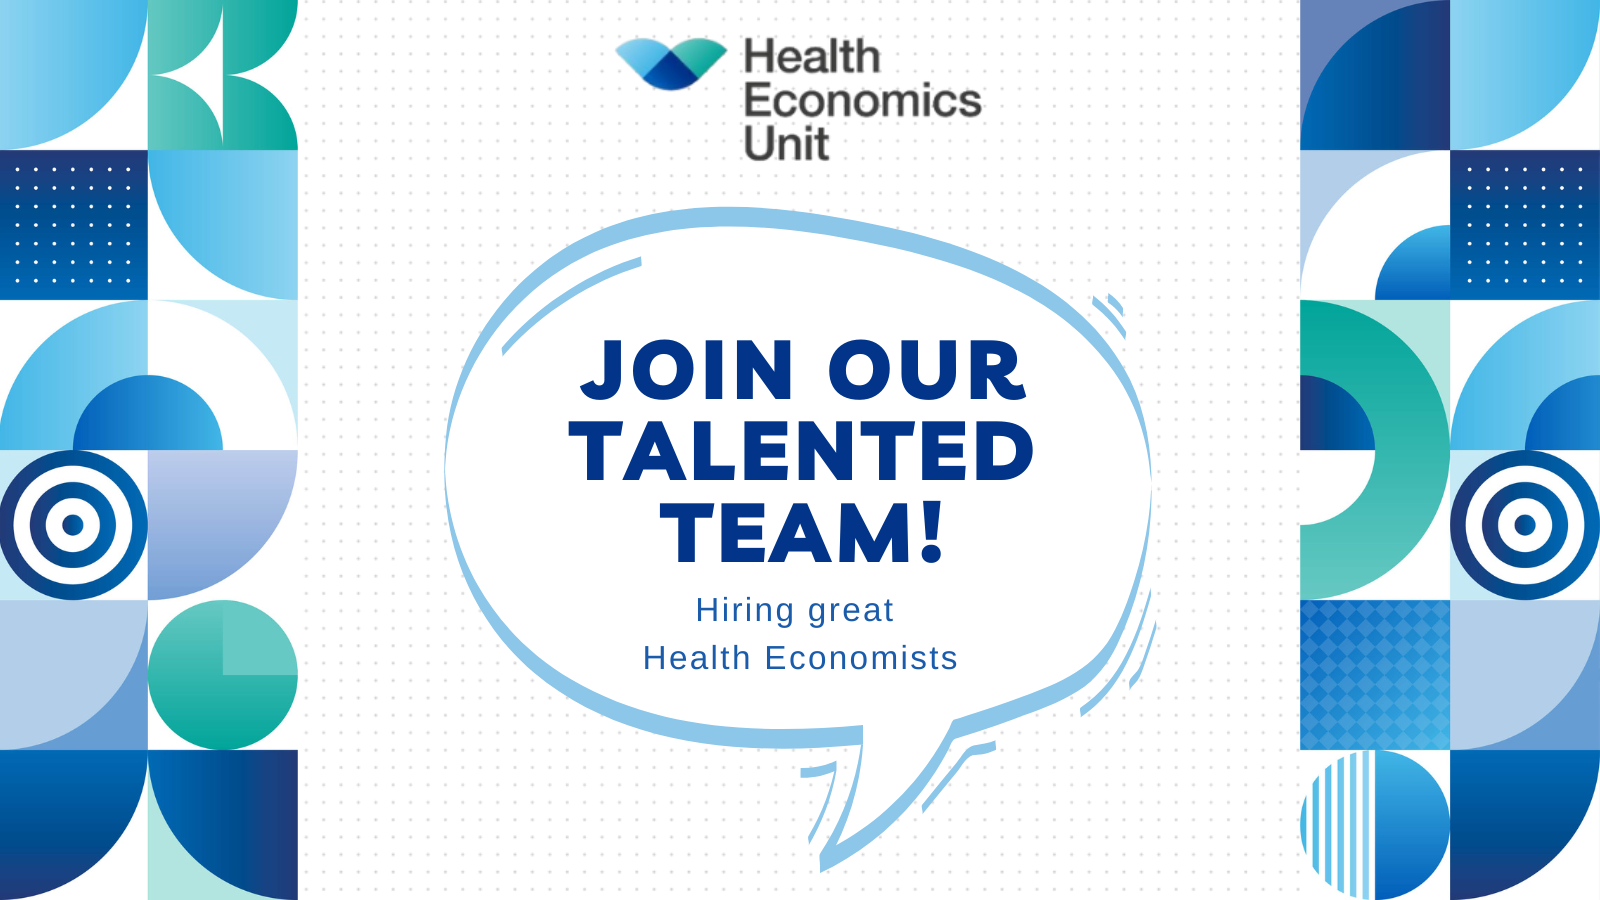 We are looking for talented Health Economists